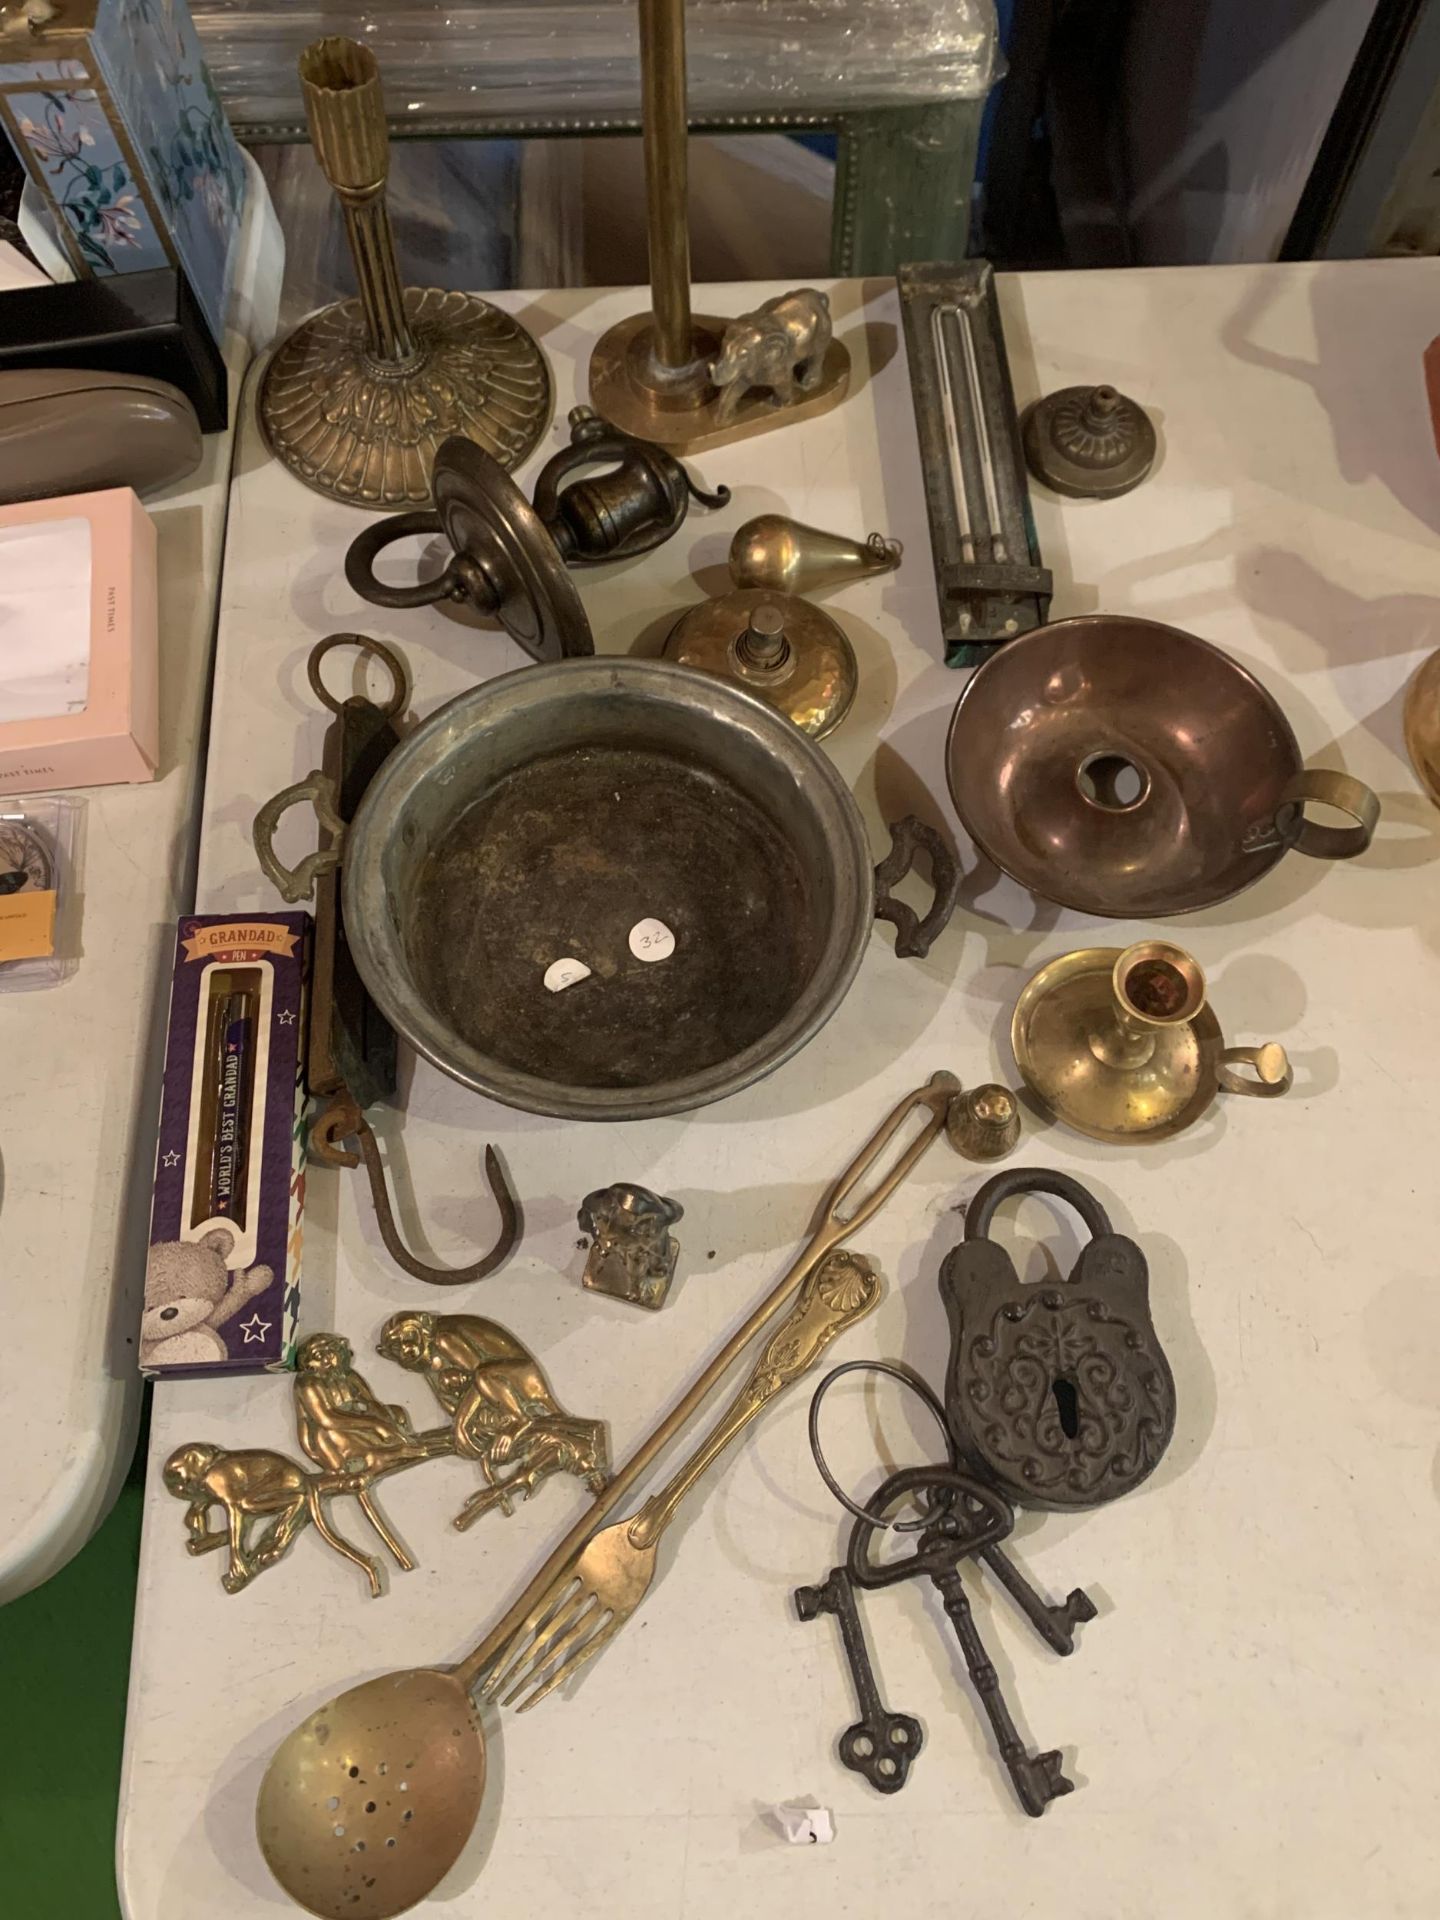 A MIXED SELECTION TO INCLUDE SOME BRASS ITEMS , A DECORATIVE VINTAGE LOCK AND THREE KEYS